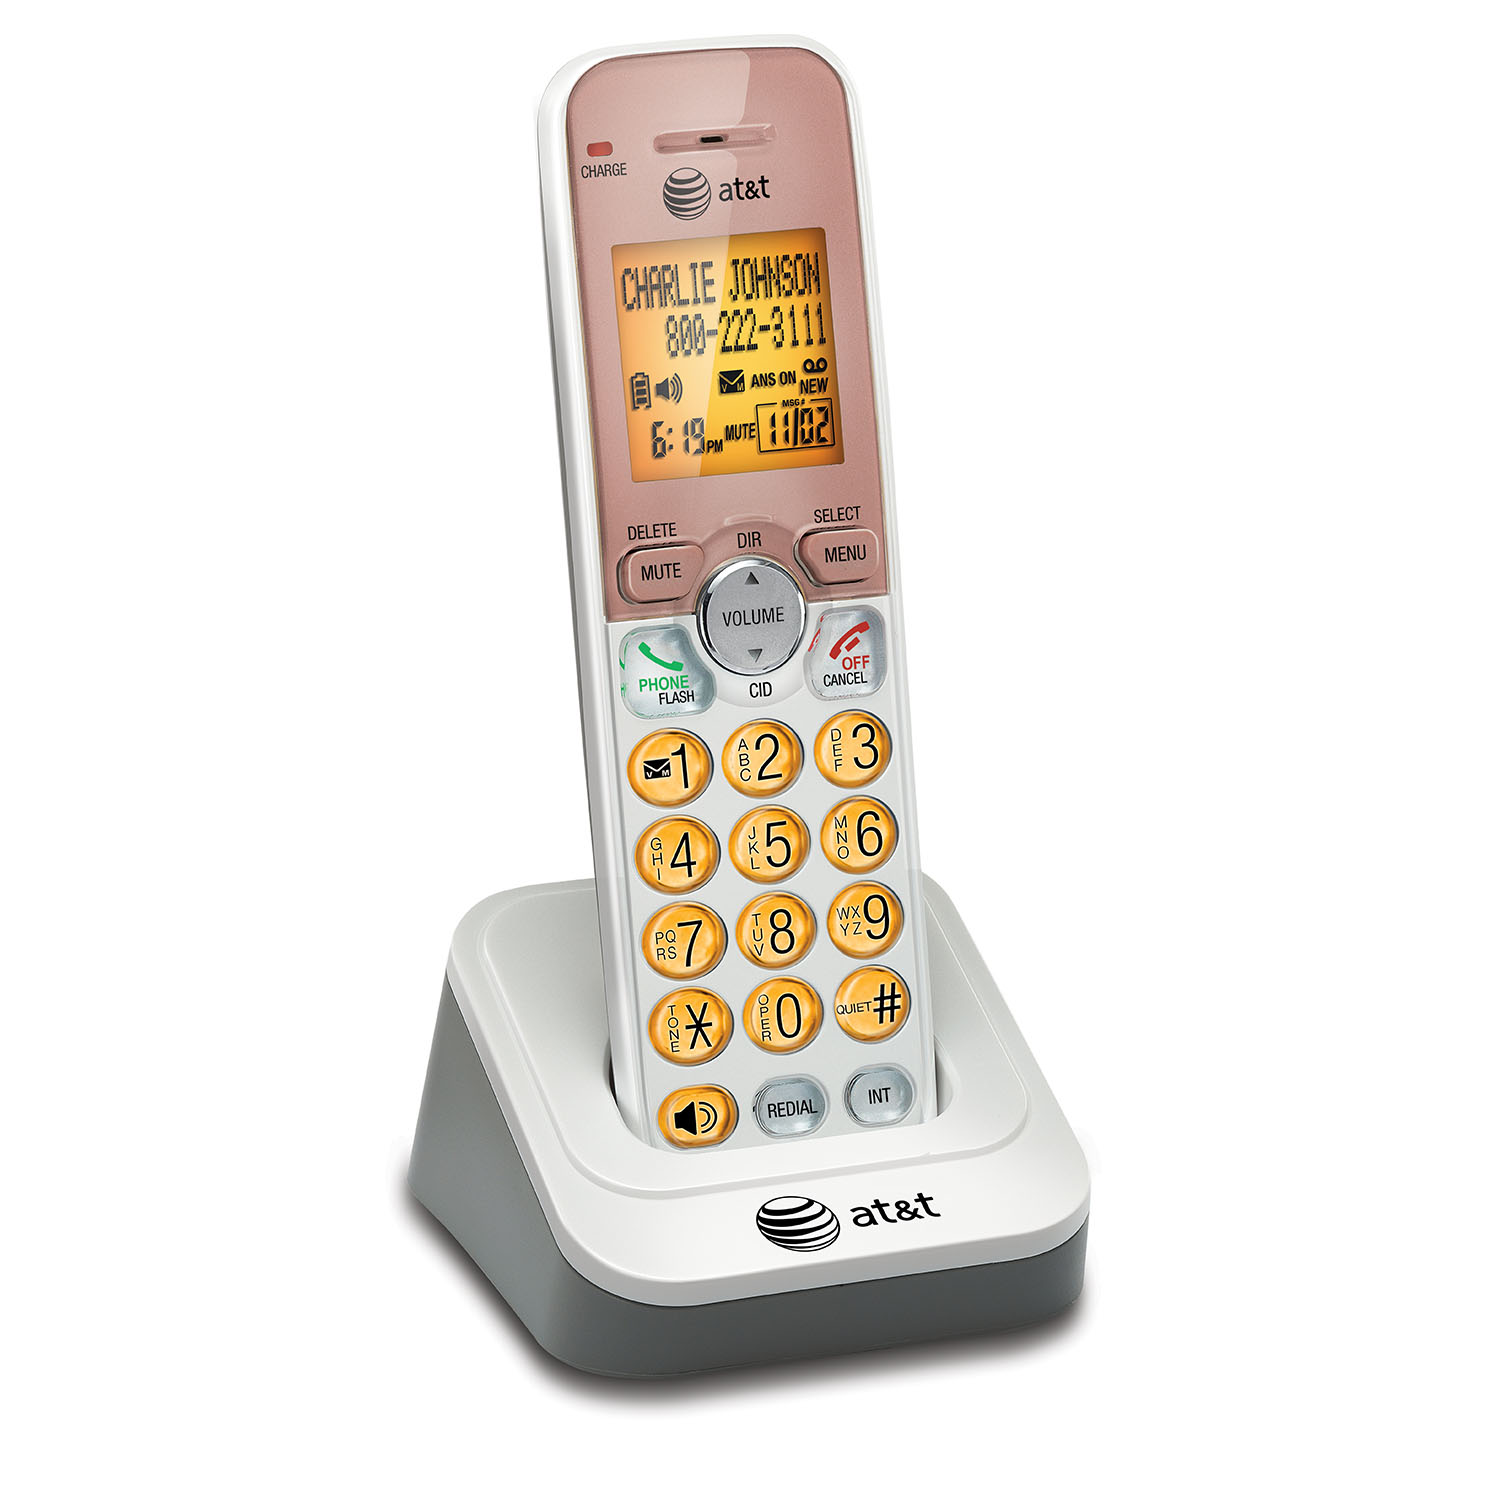 5 handset cordless answering system with caller ID/call waiting - view 11